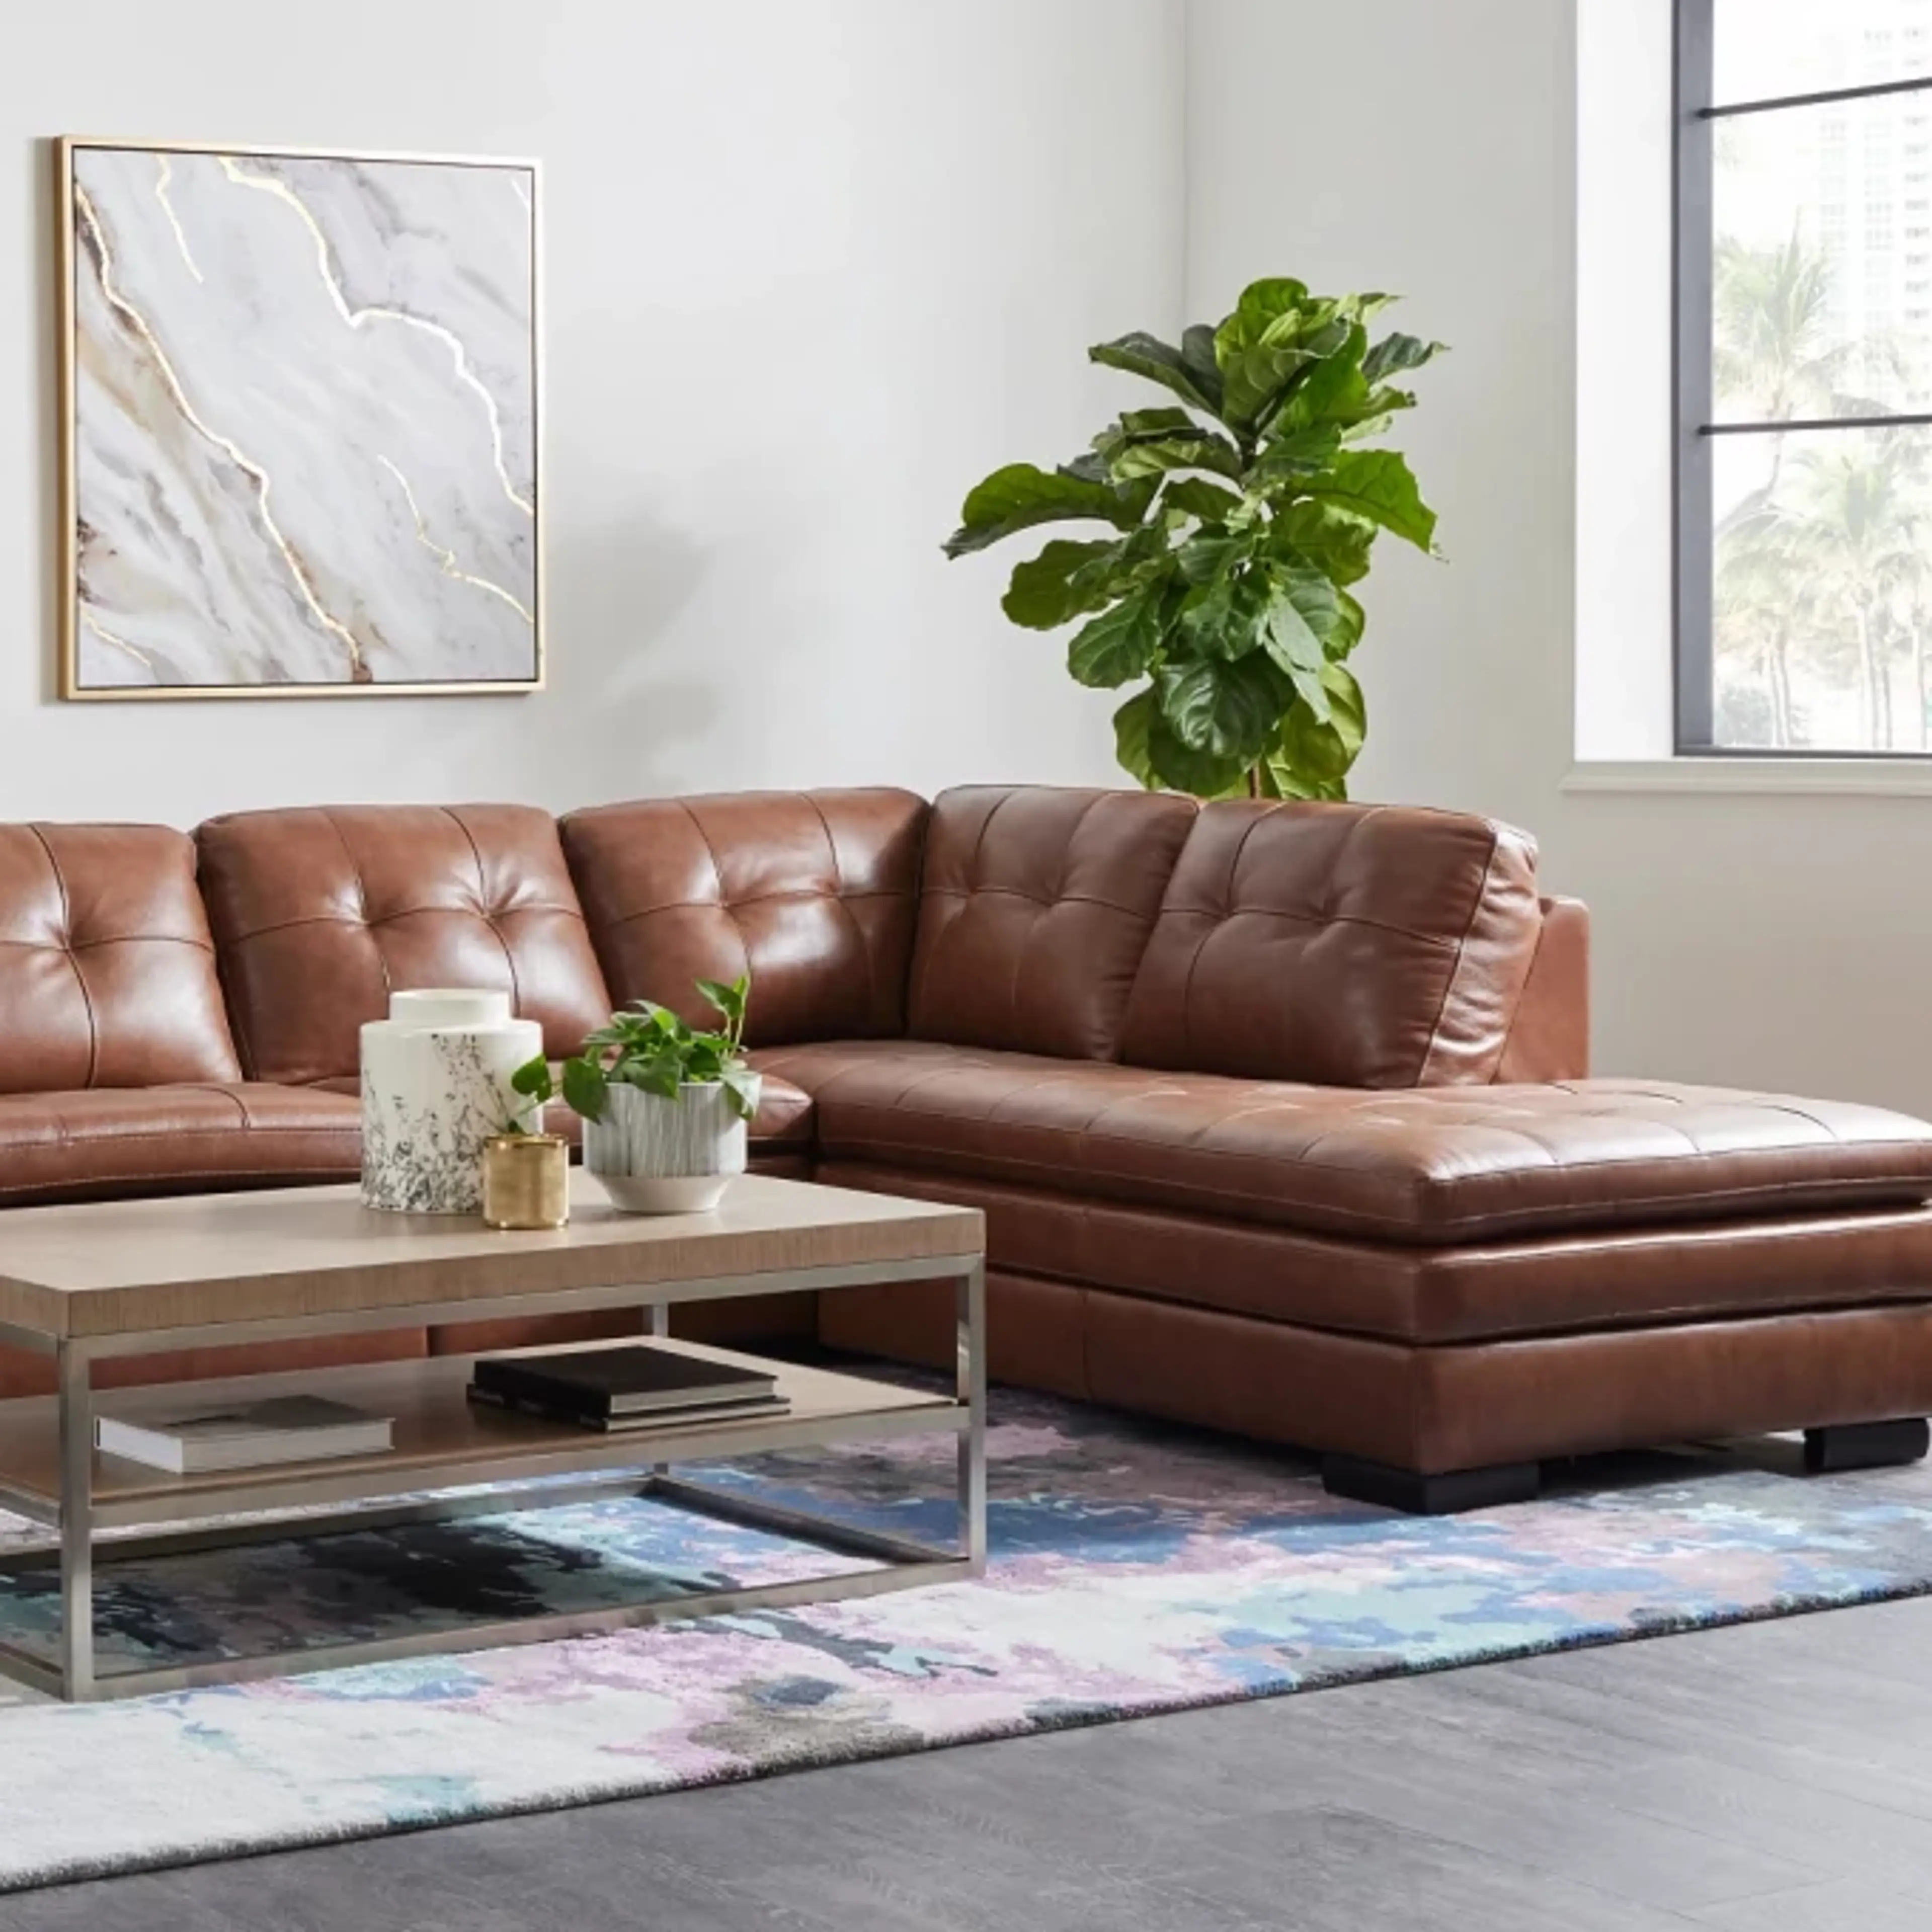 1. Understanding Your Upholstered Furniture Material